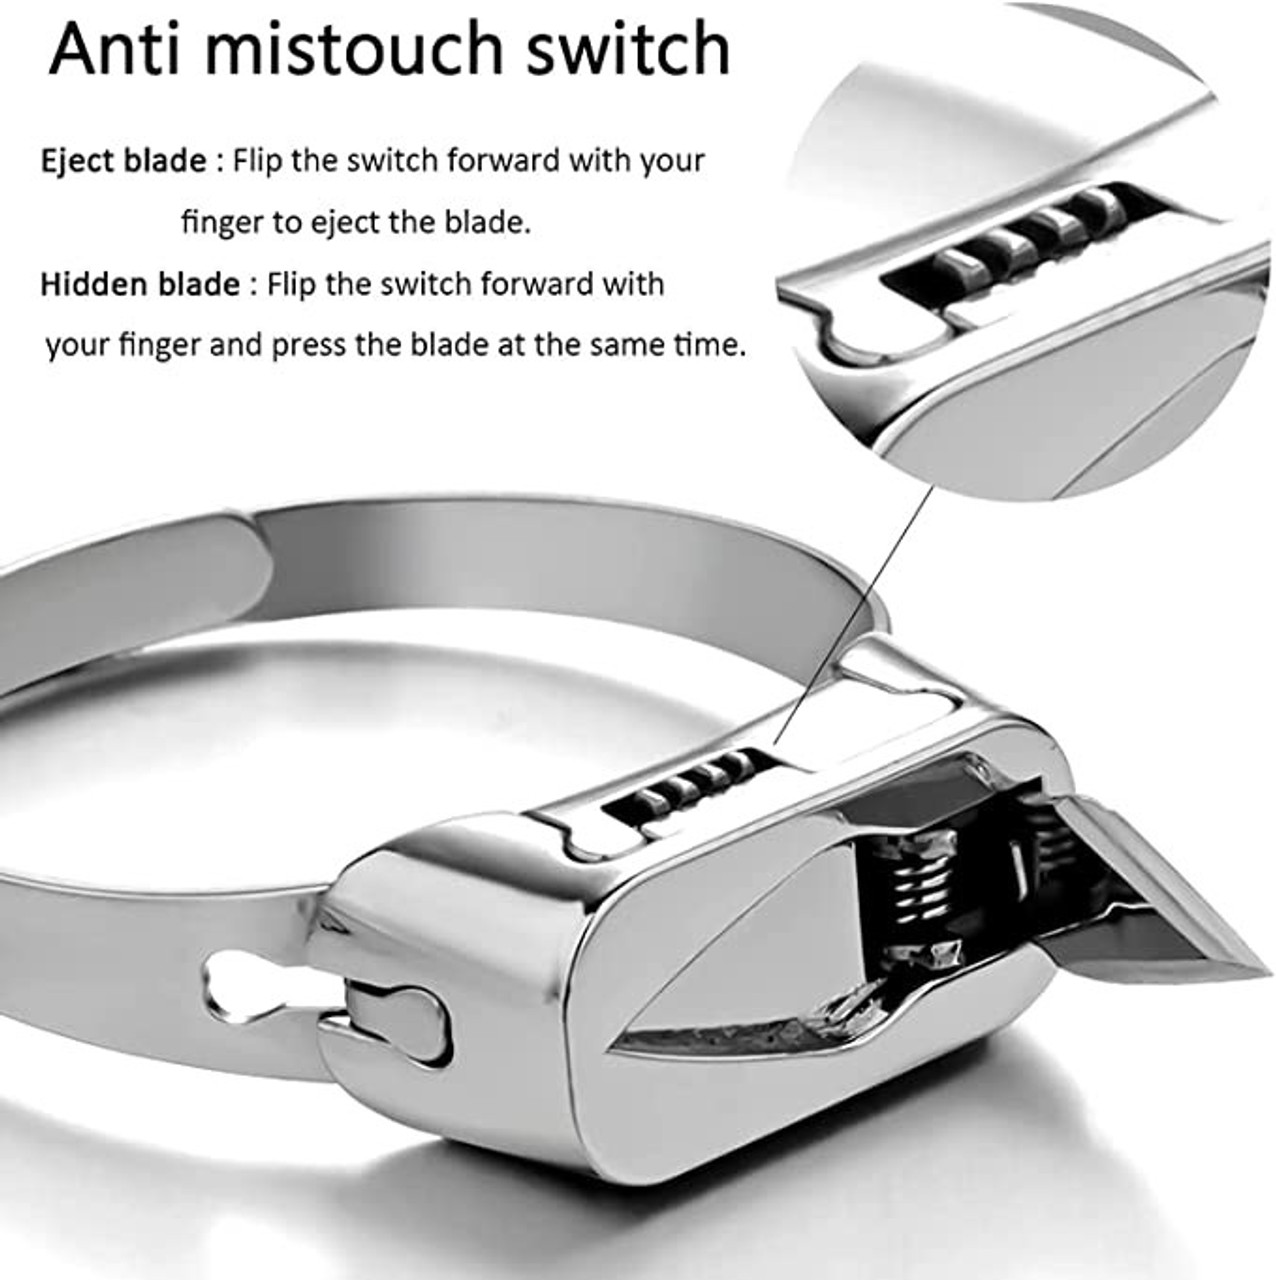 Ring Knife Multi-Functional Outdoor Self-Defense Ring Is Durable